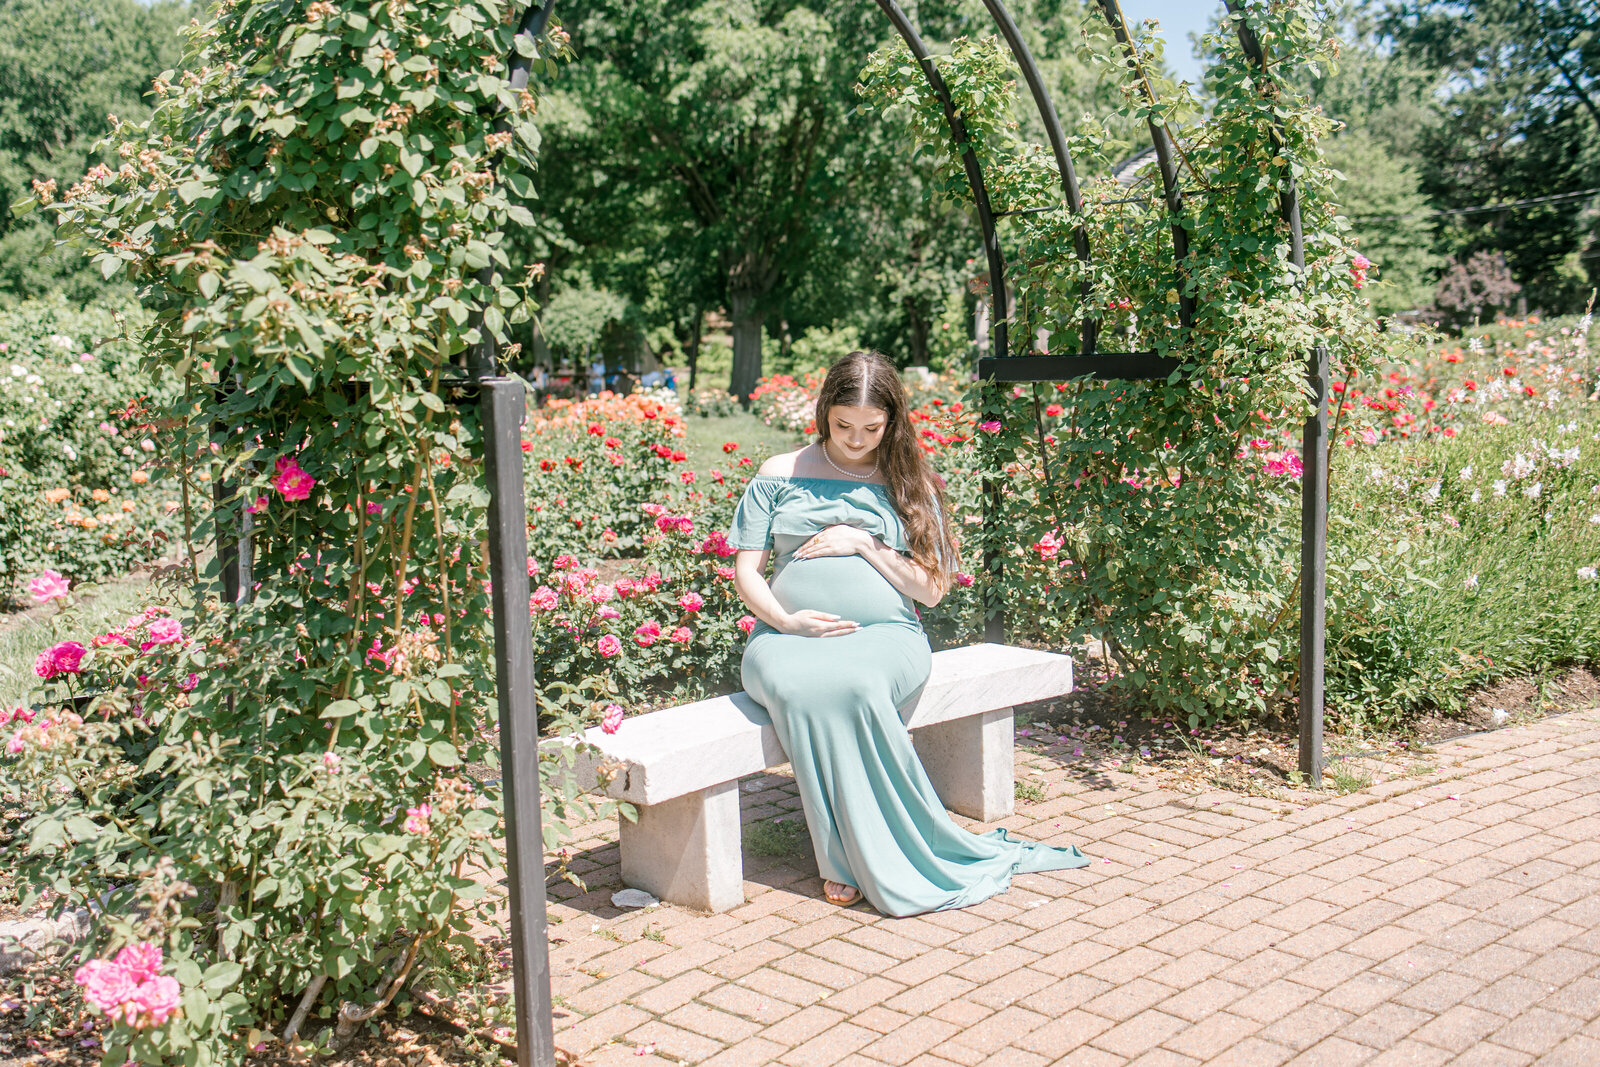 Pregnant woman sitting on a bench in a garden